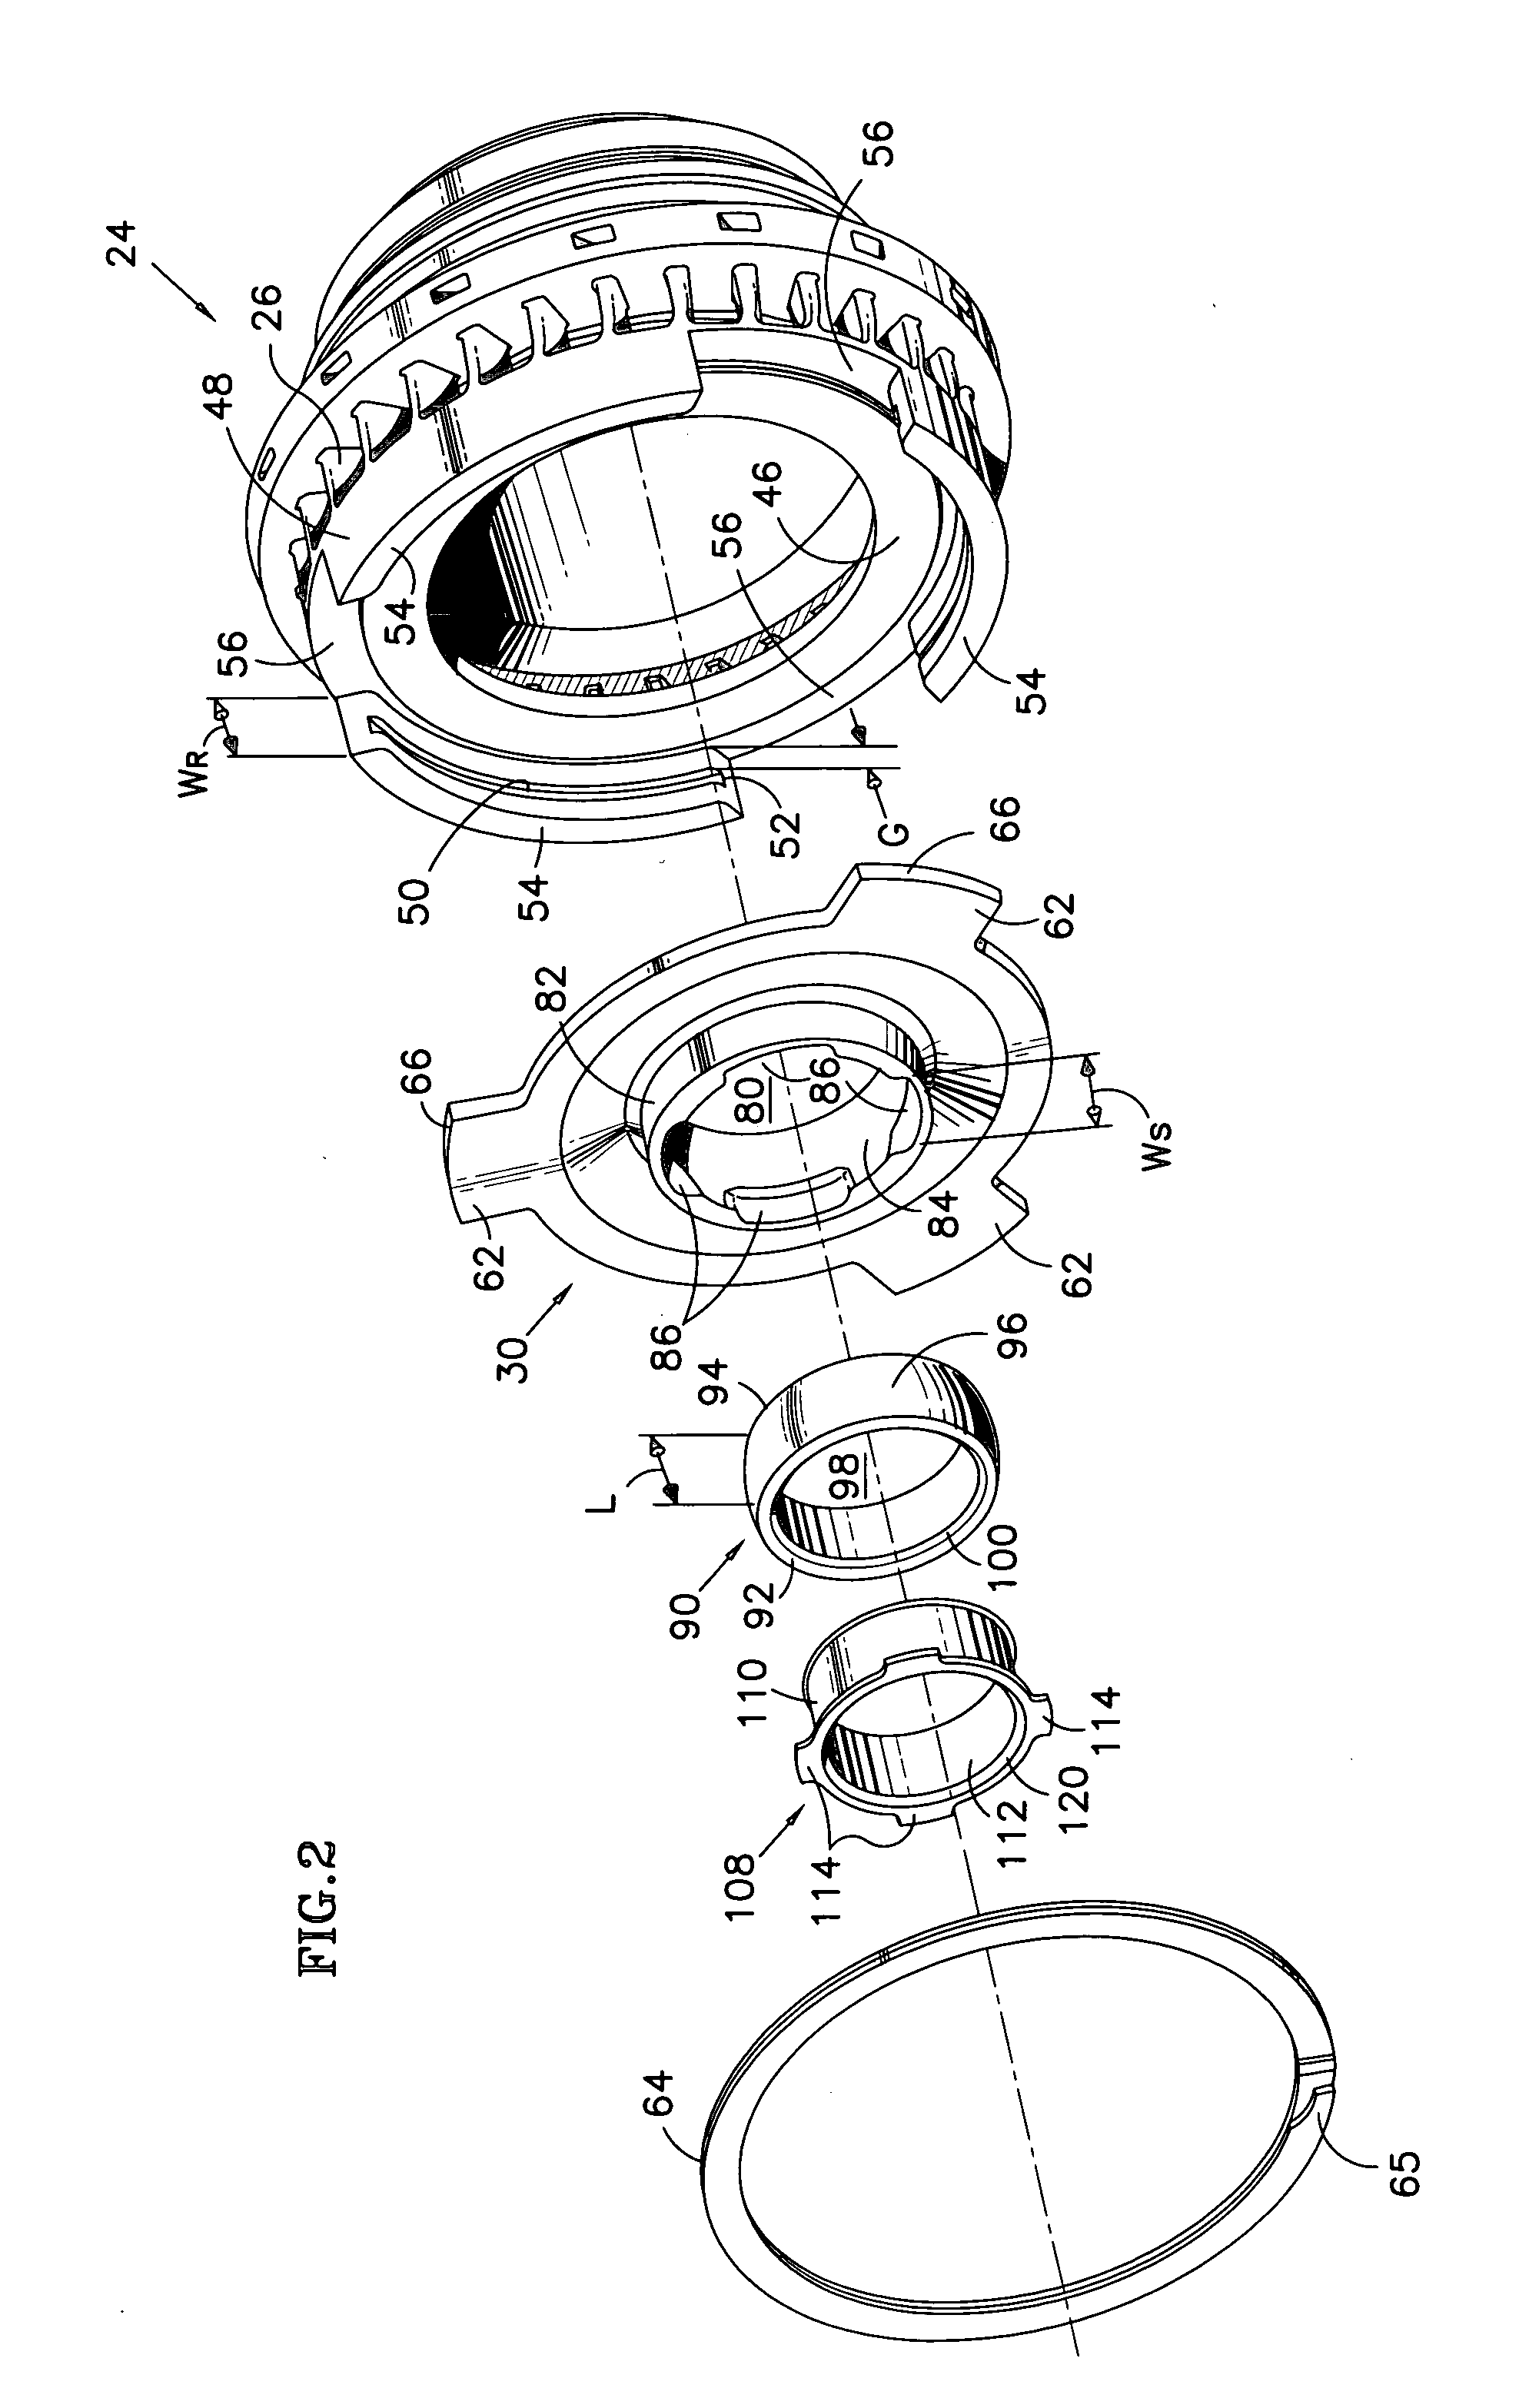 Fuel injector bearing plate assembly and swirler assembly